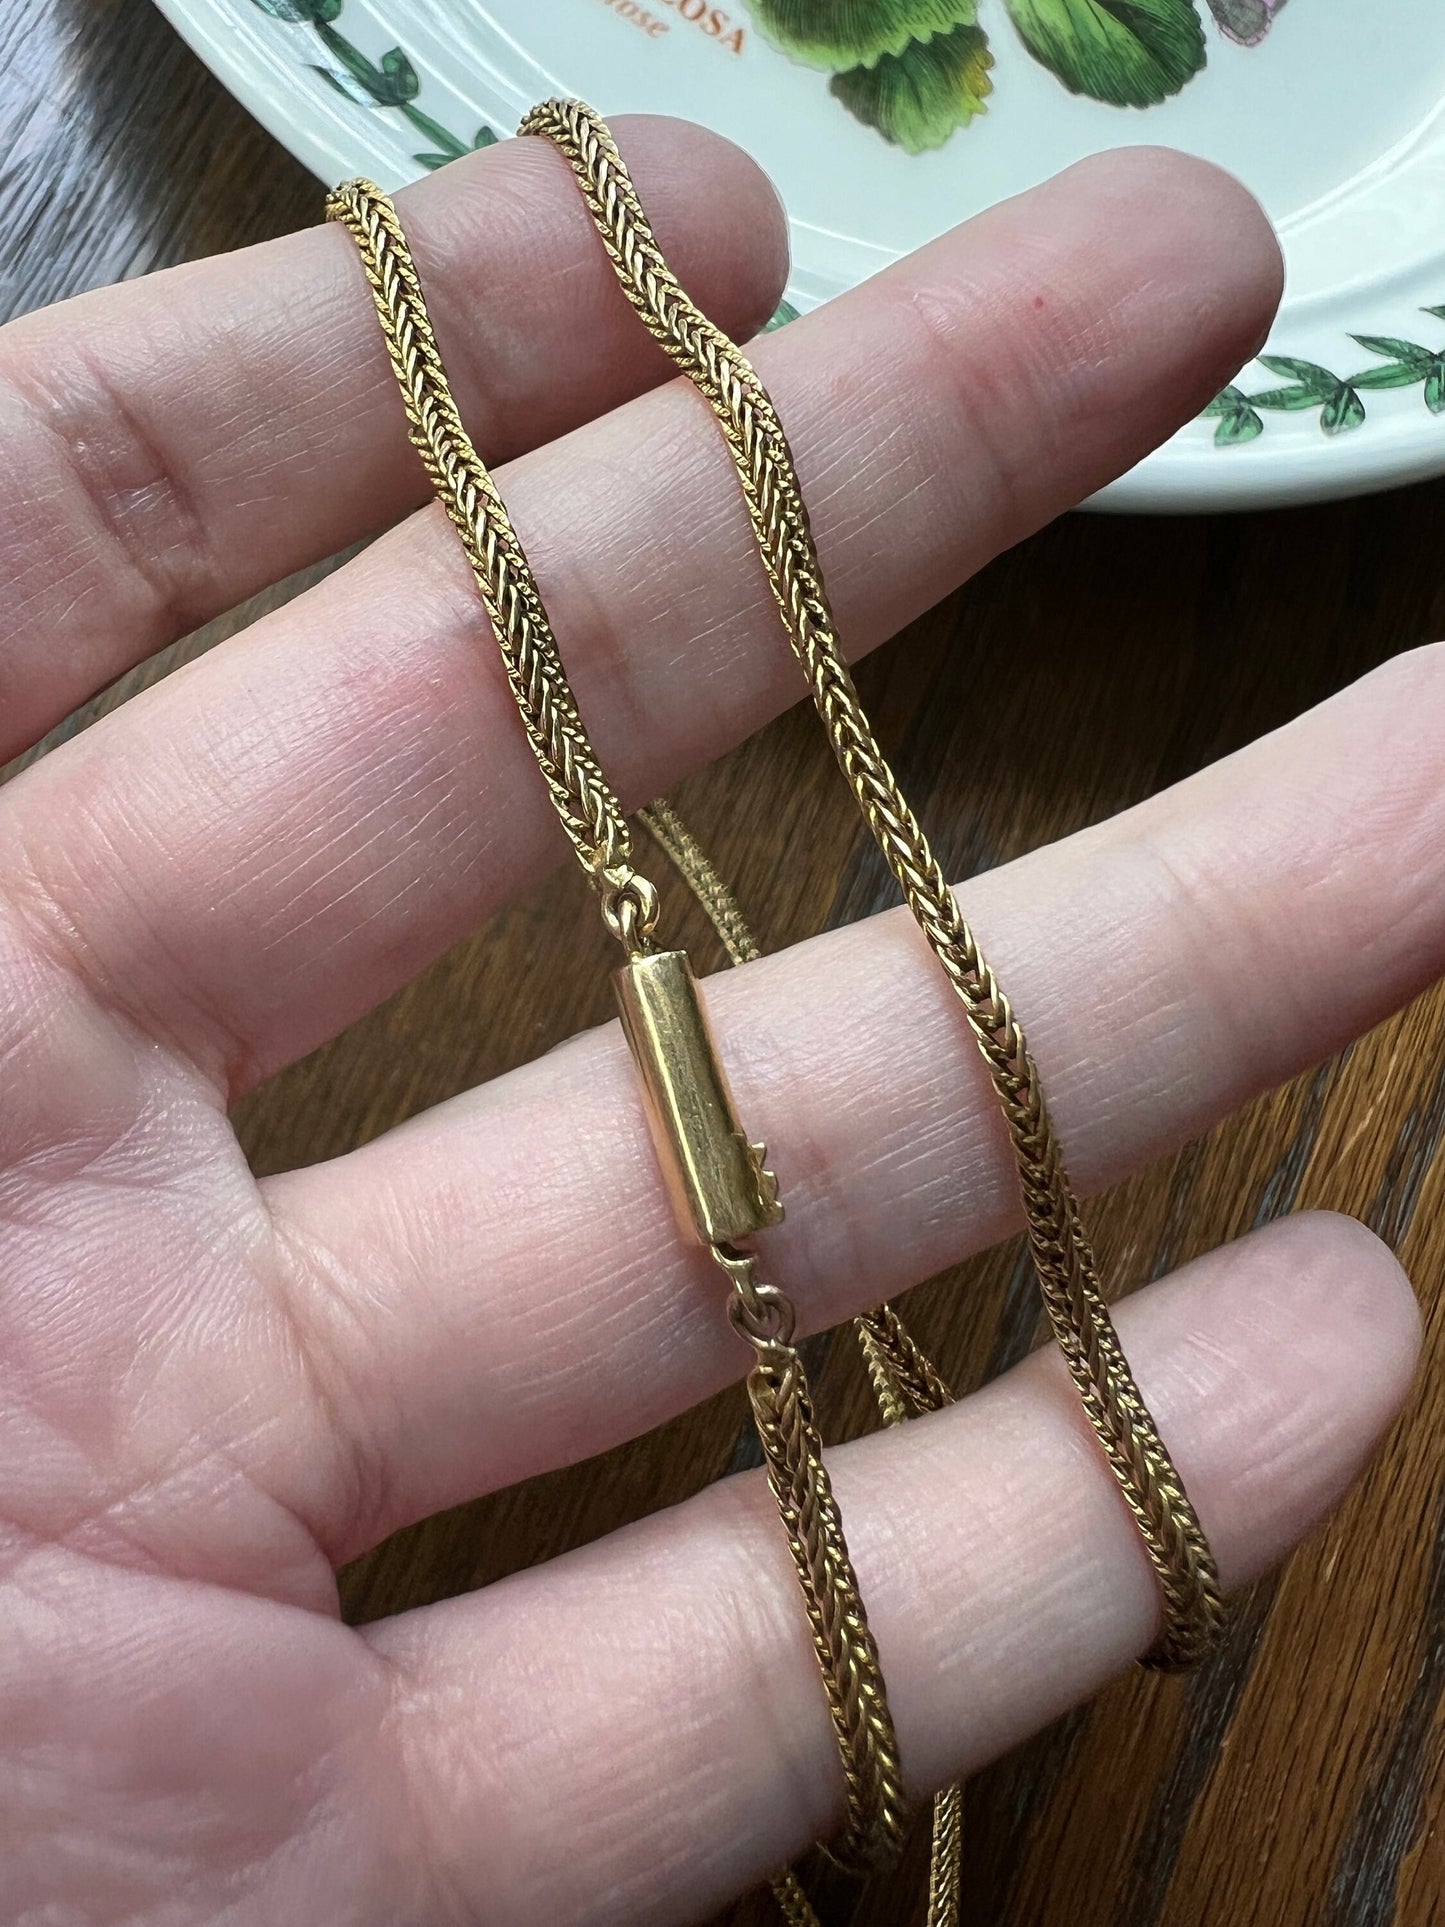 Antique CHAIN Victorian Herringbone Box 20.5" Necklace Layering 8.6g 18k Gold Solid French Belle Epoque Pendant Holder Warm Patina Love!